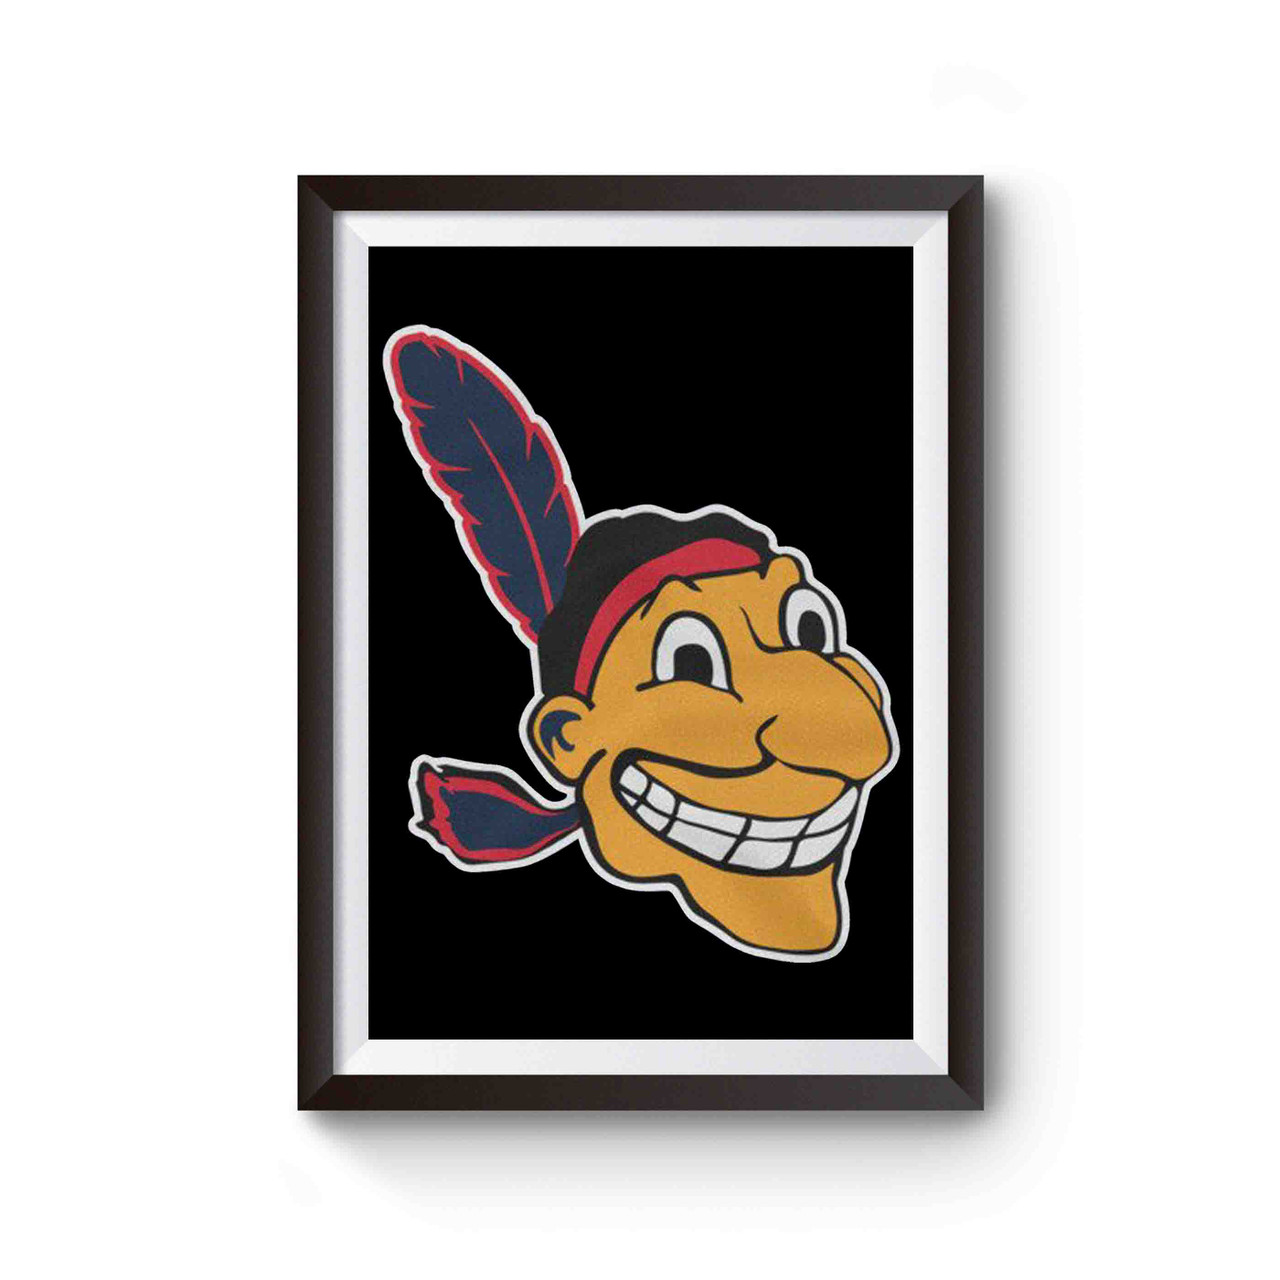 Cleveland Indians Chief Wahoo Decal